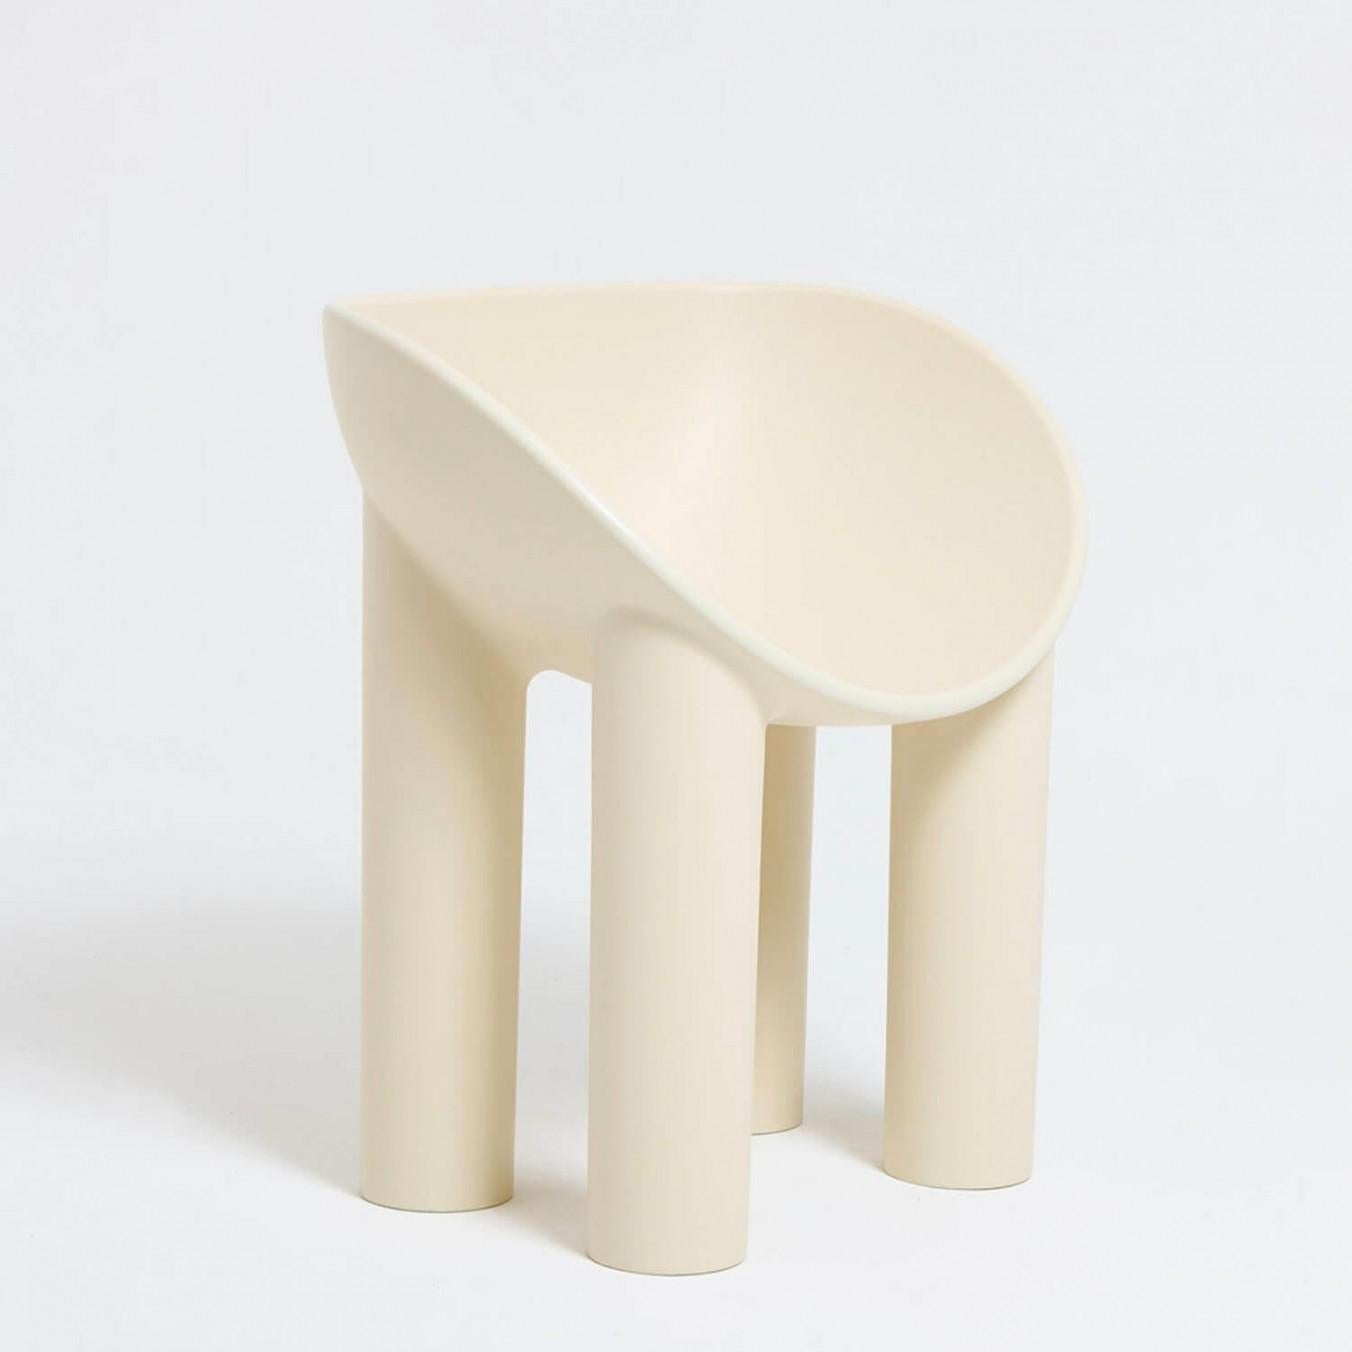 Contemporary fiberglass chair - Roly Poly Dining Chair by Faye Toogood. This is shown in the cream fiberglass finish. 
Design: Faye Toogood
Material: Fiberglass 
Available also in raw or charcoal finish, please contact us.

The Roly Poly chair